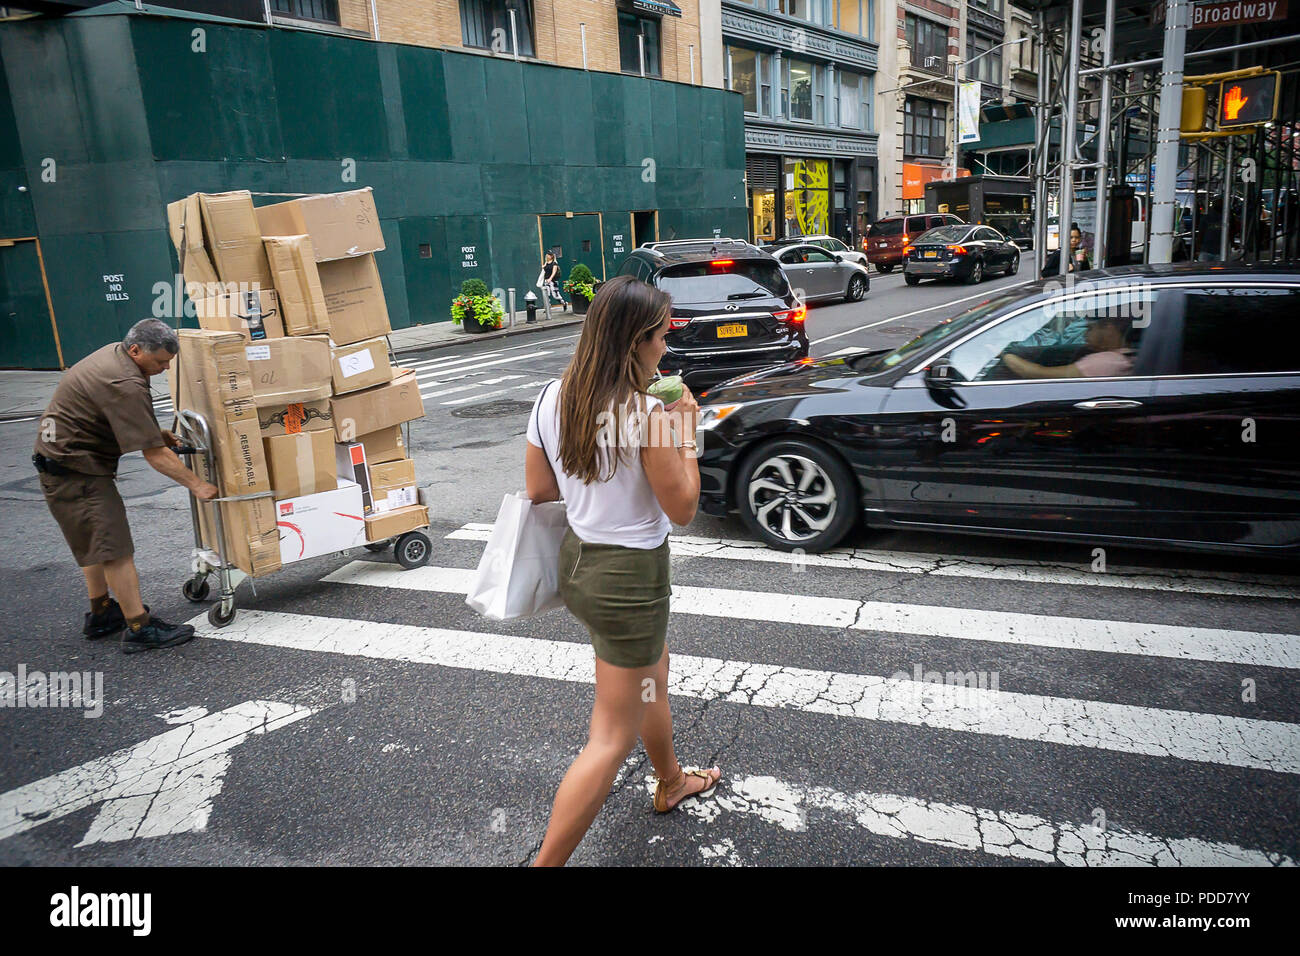 A woman crosses Broadway with her Matcha beverage in the NoMad neighborhood of New York on Friday, July 27, 2018. The popular beverage, matcha, is ground green tea and is used to make instagrammable beverages popular with millennials. Loaded with antioxidants matcha supposedly has medicinal qualities. (Â© Richard B. Levine) Stock Photo